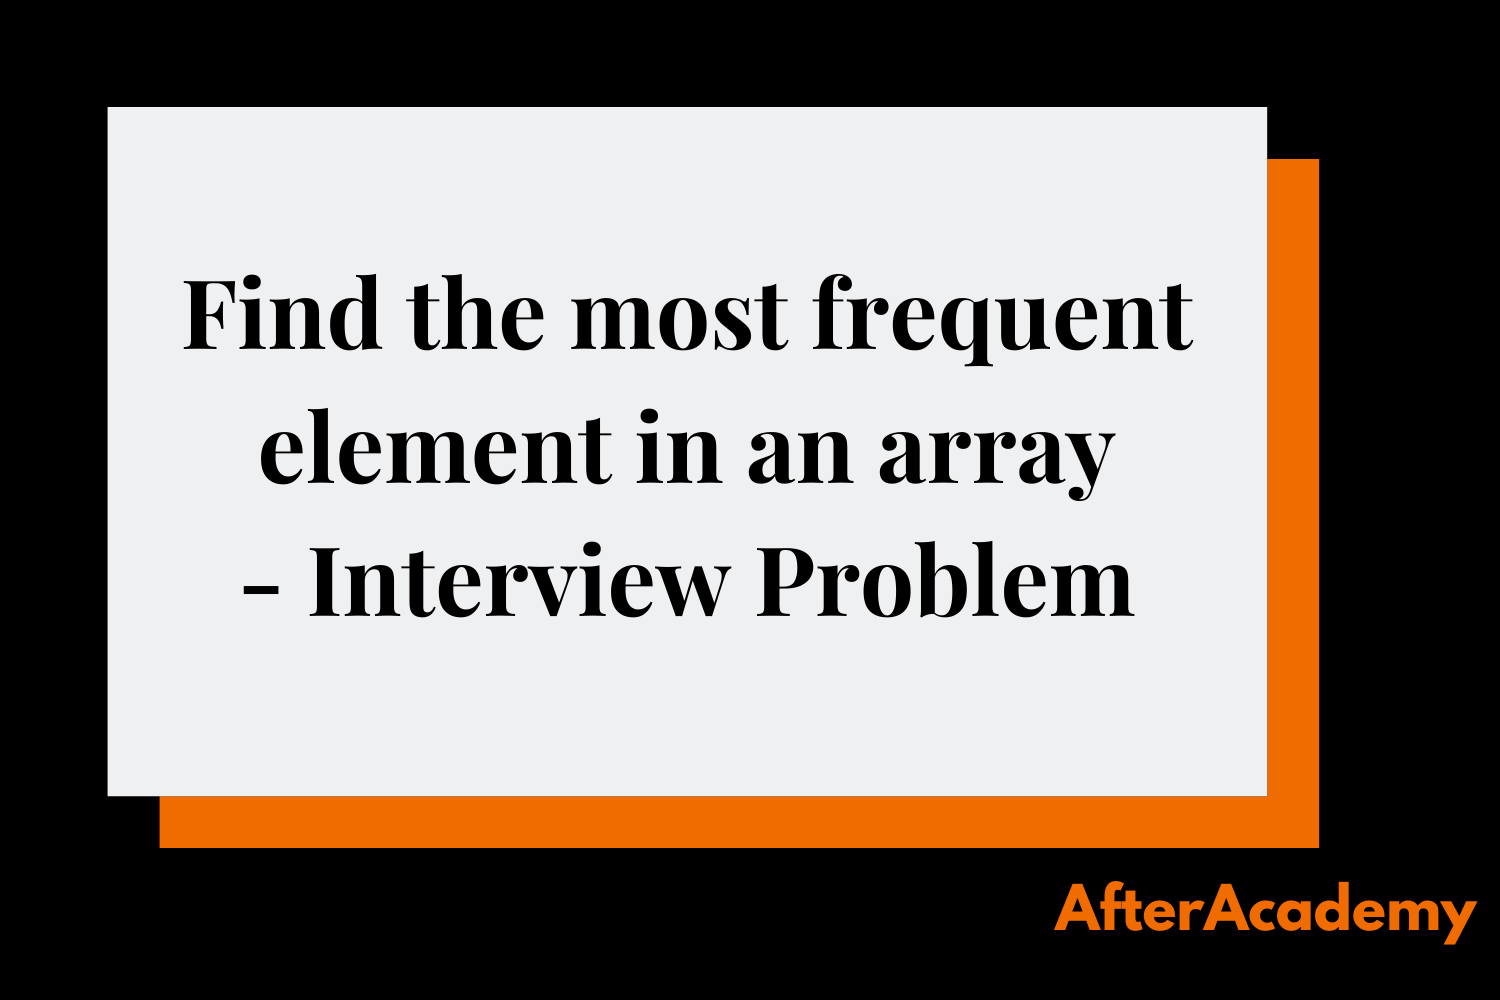 Find the most frequent element in an array - Interview Problem